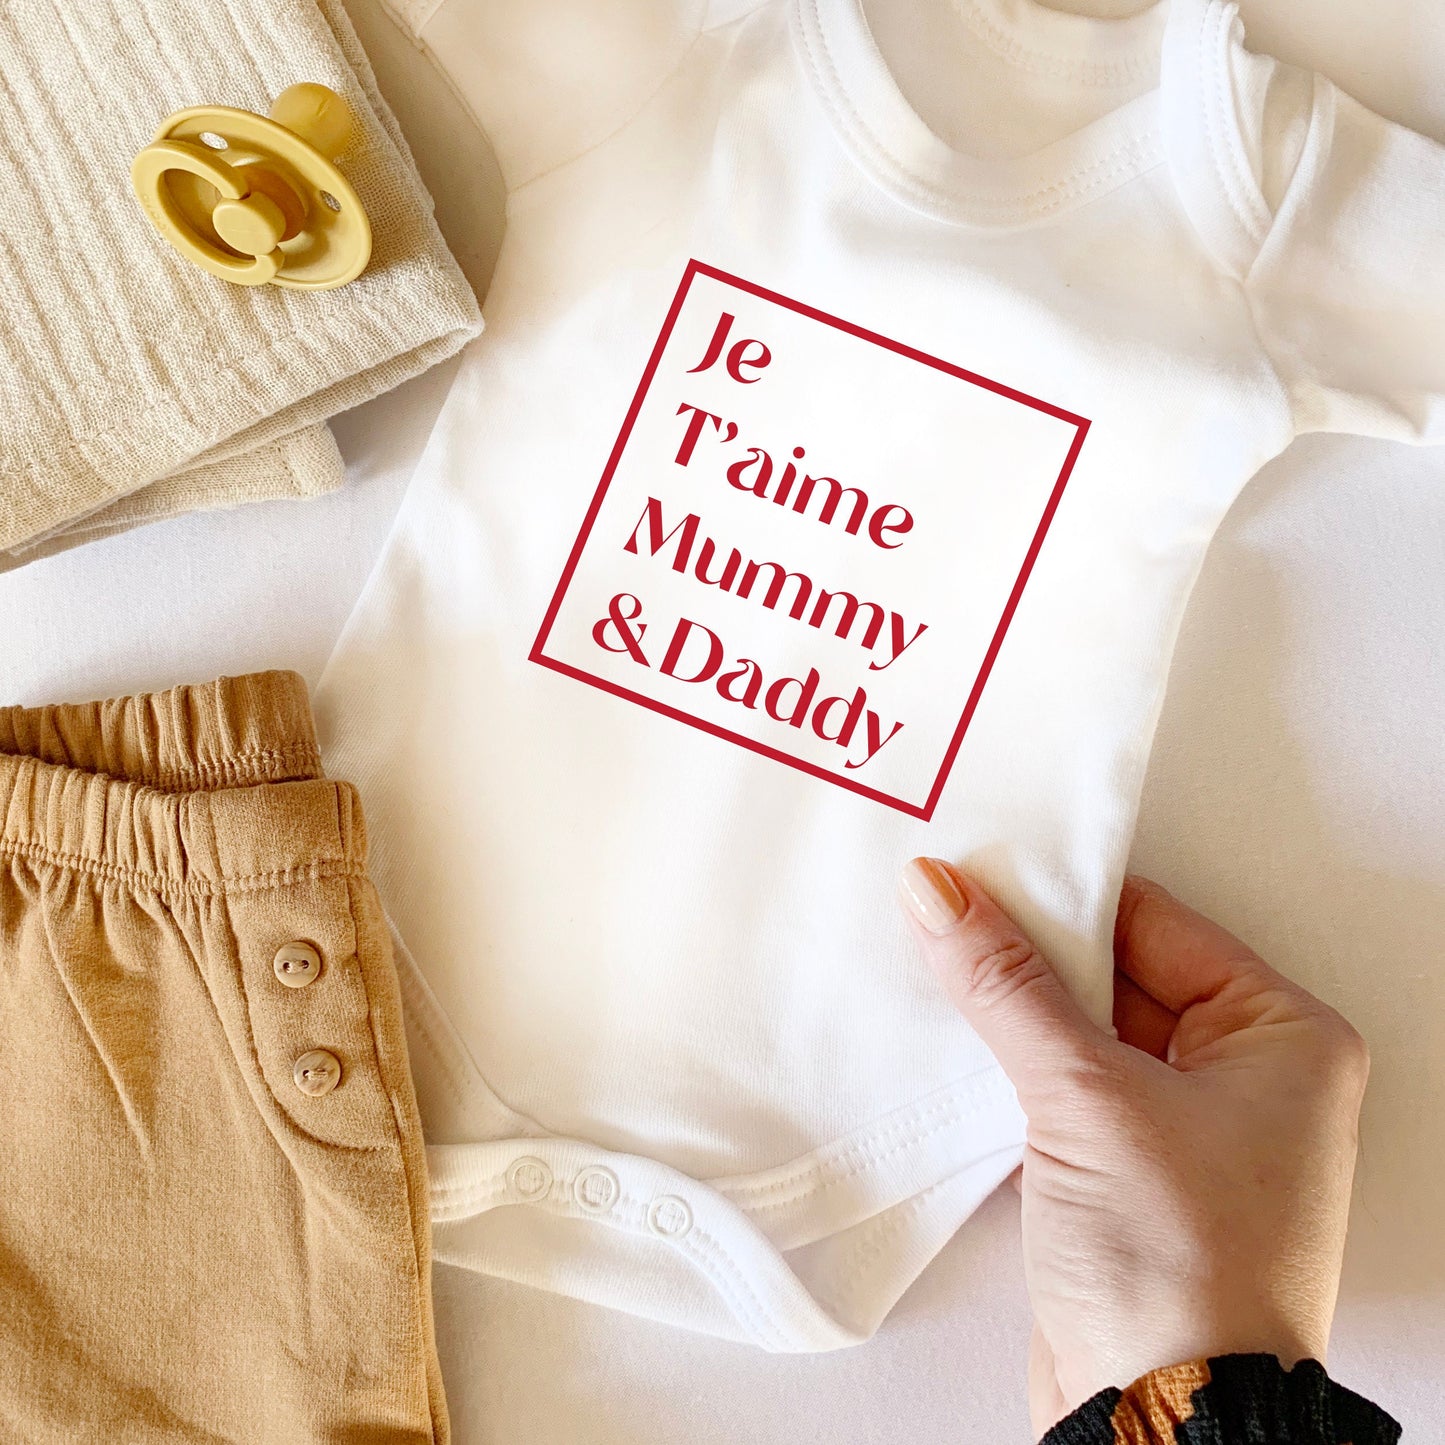 Je T'aime Personalised Baby grow